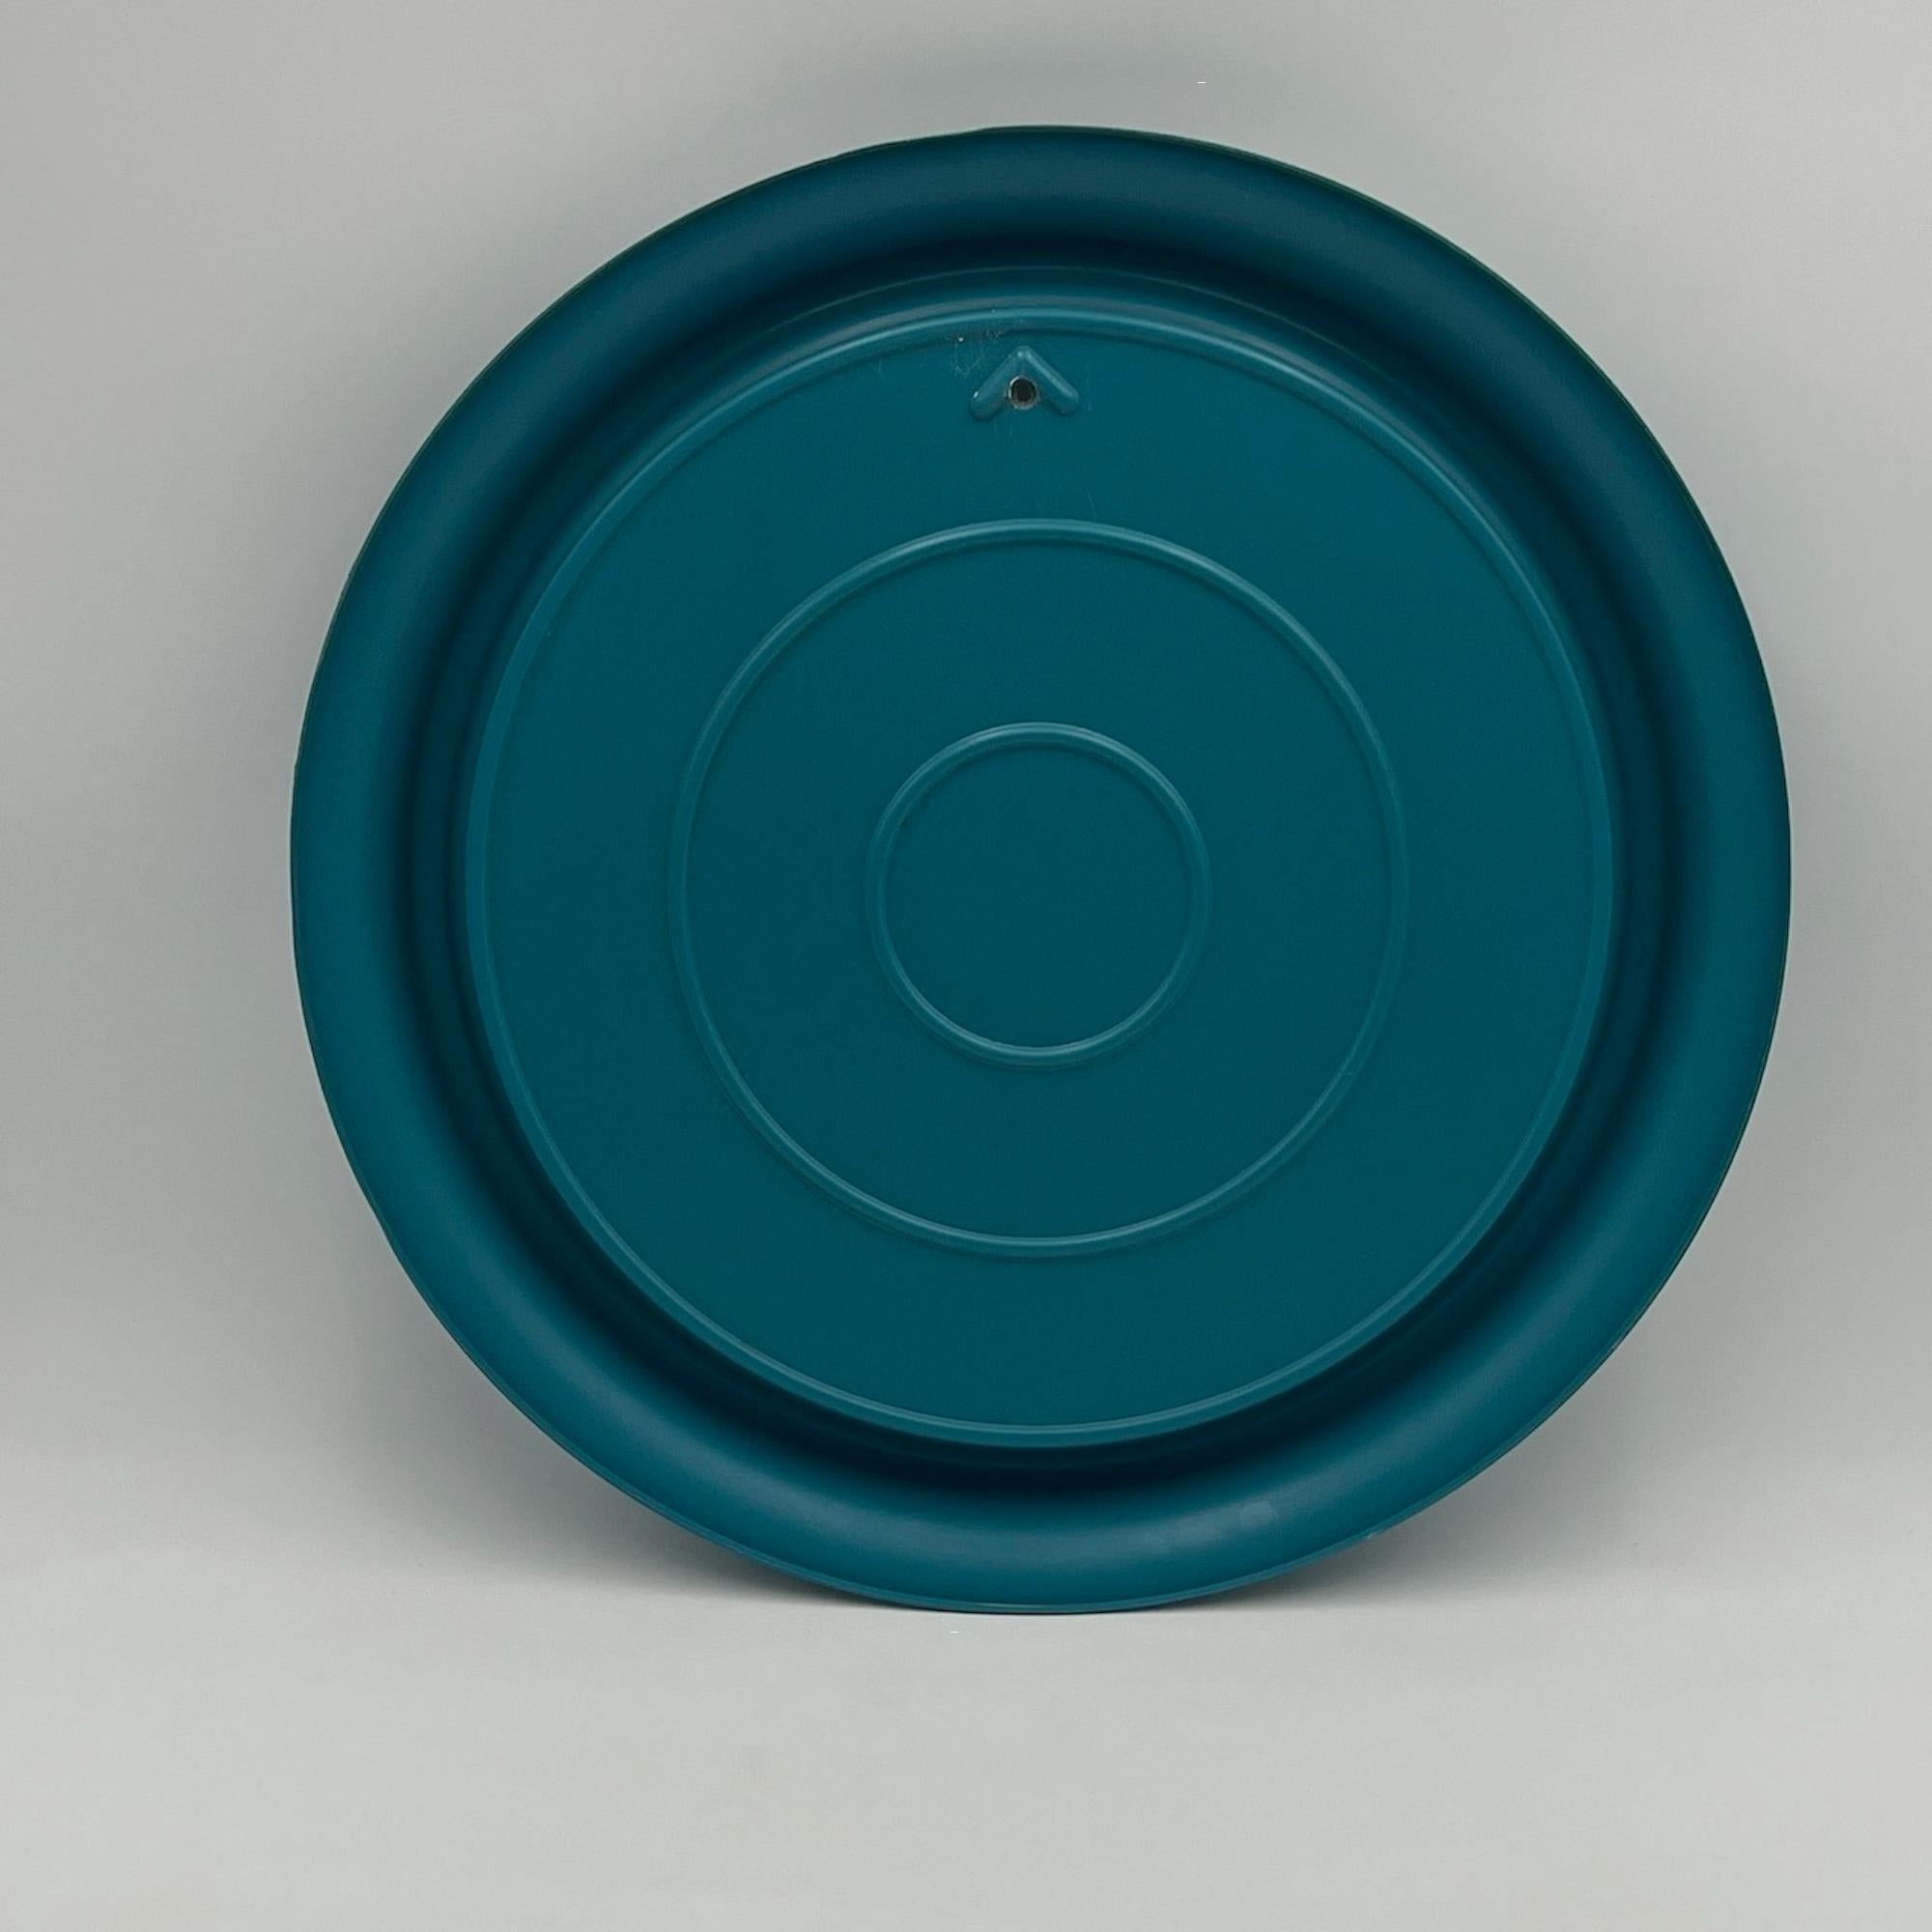 Vintage Round Wall Mirror in Turquoise Blue Made in Italy, 1970s For Sale 1